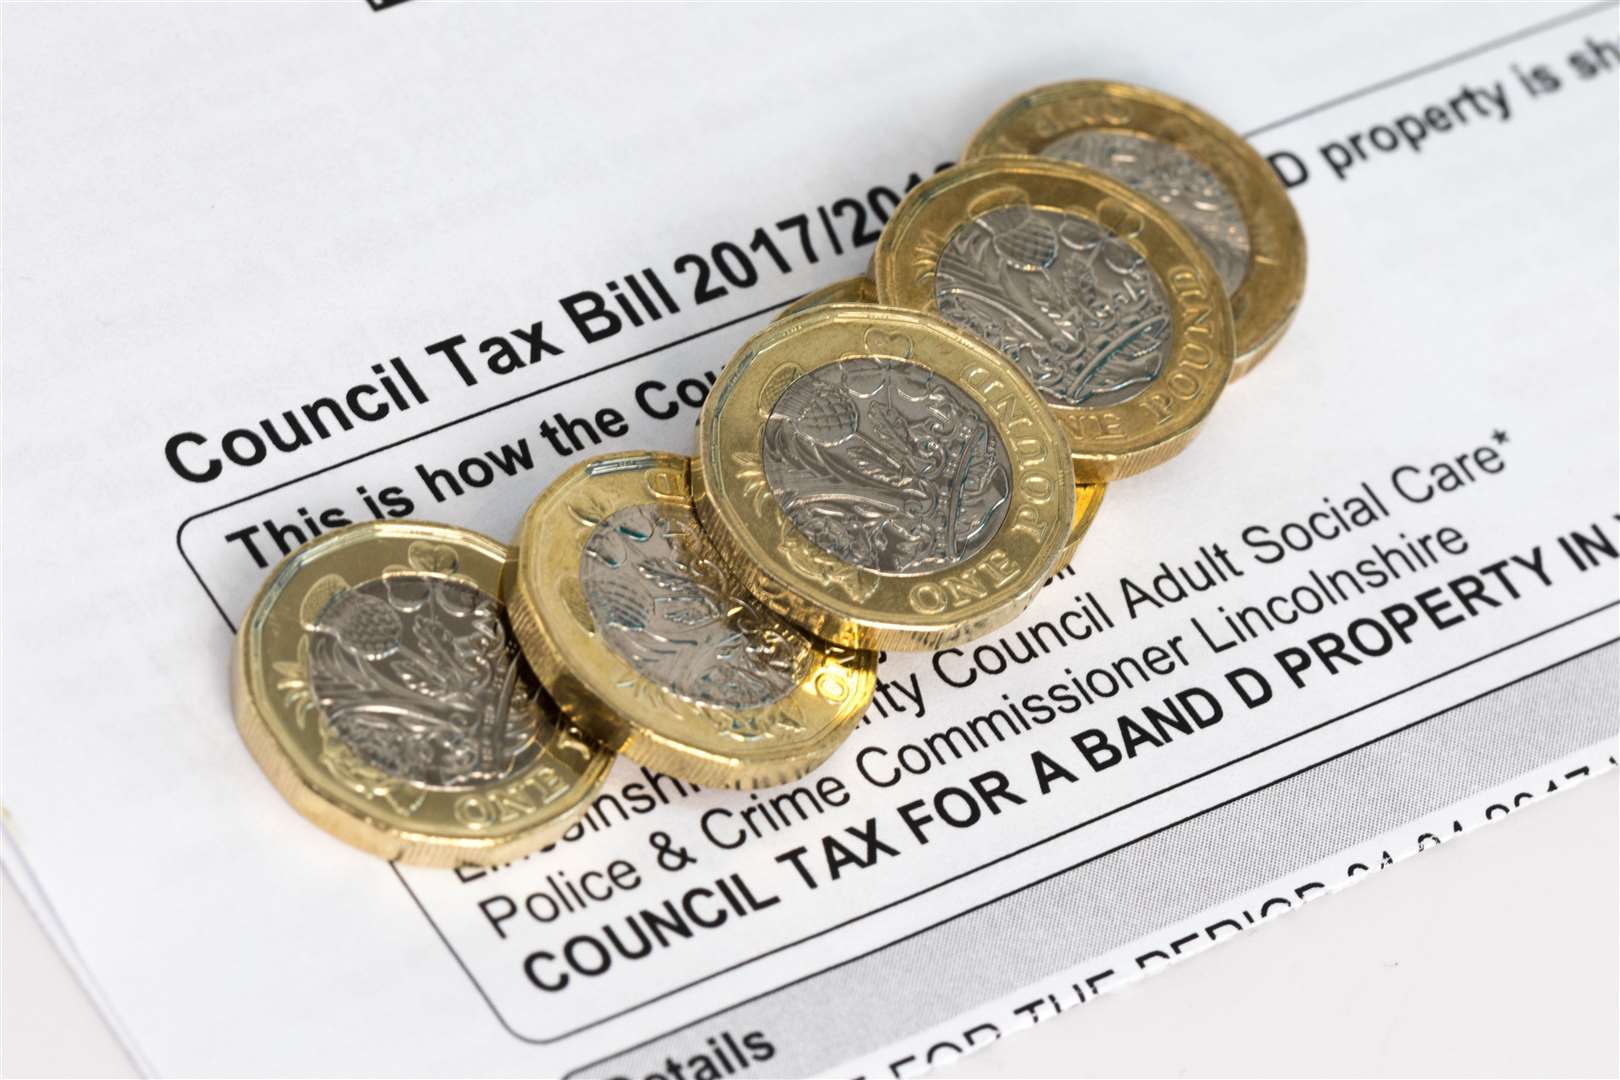 KCC will be discussing the council tax increase this week